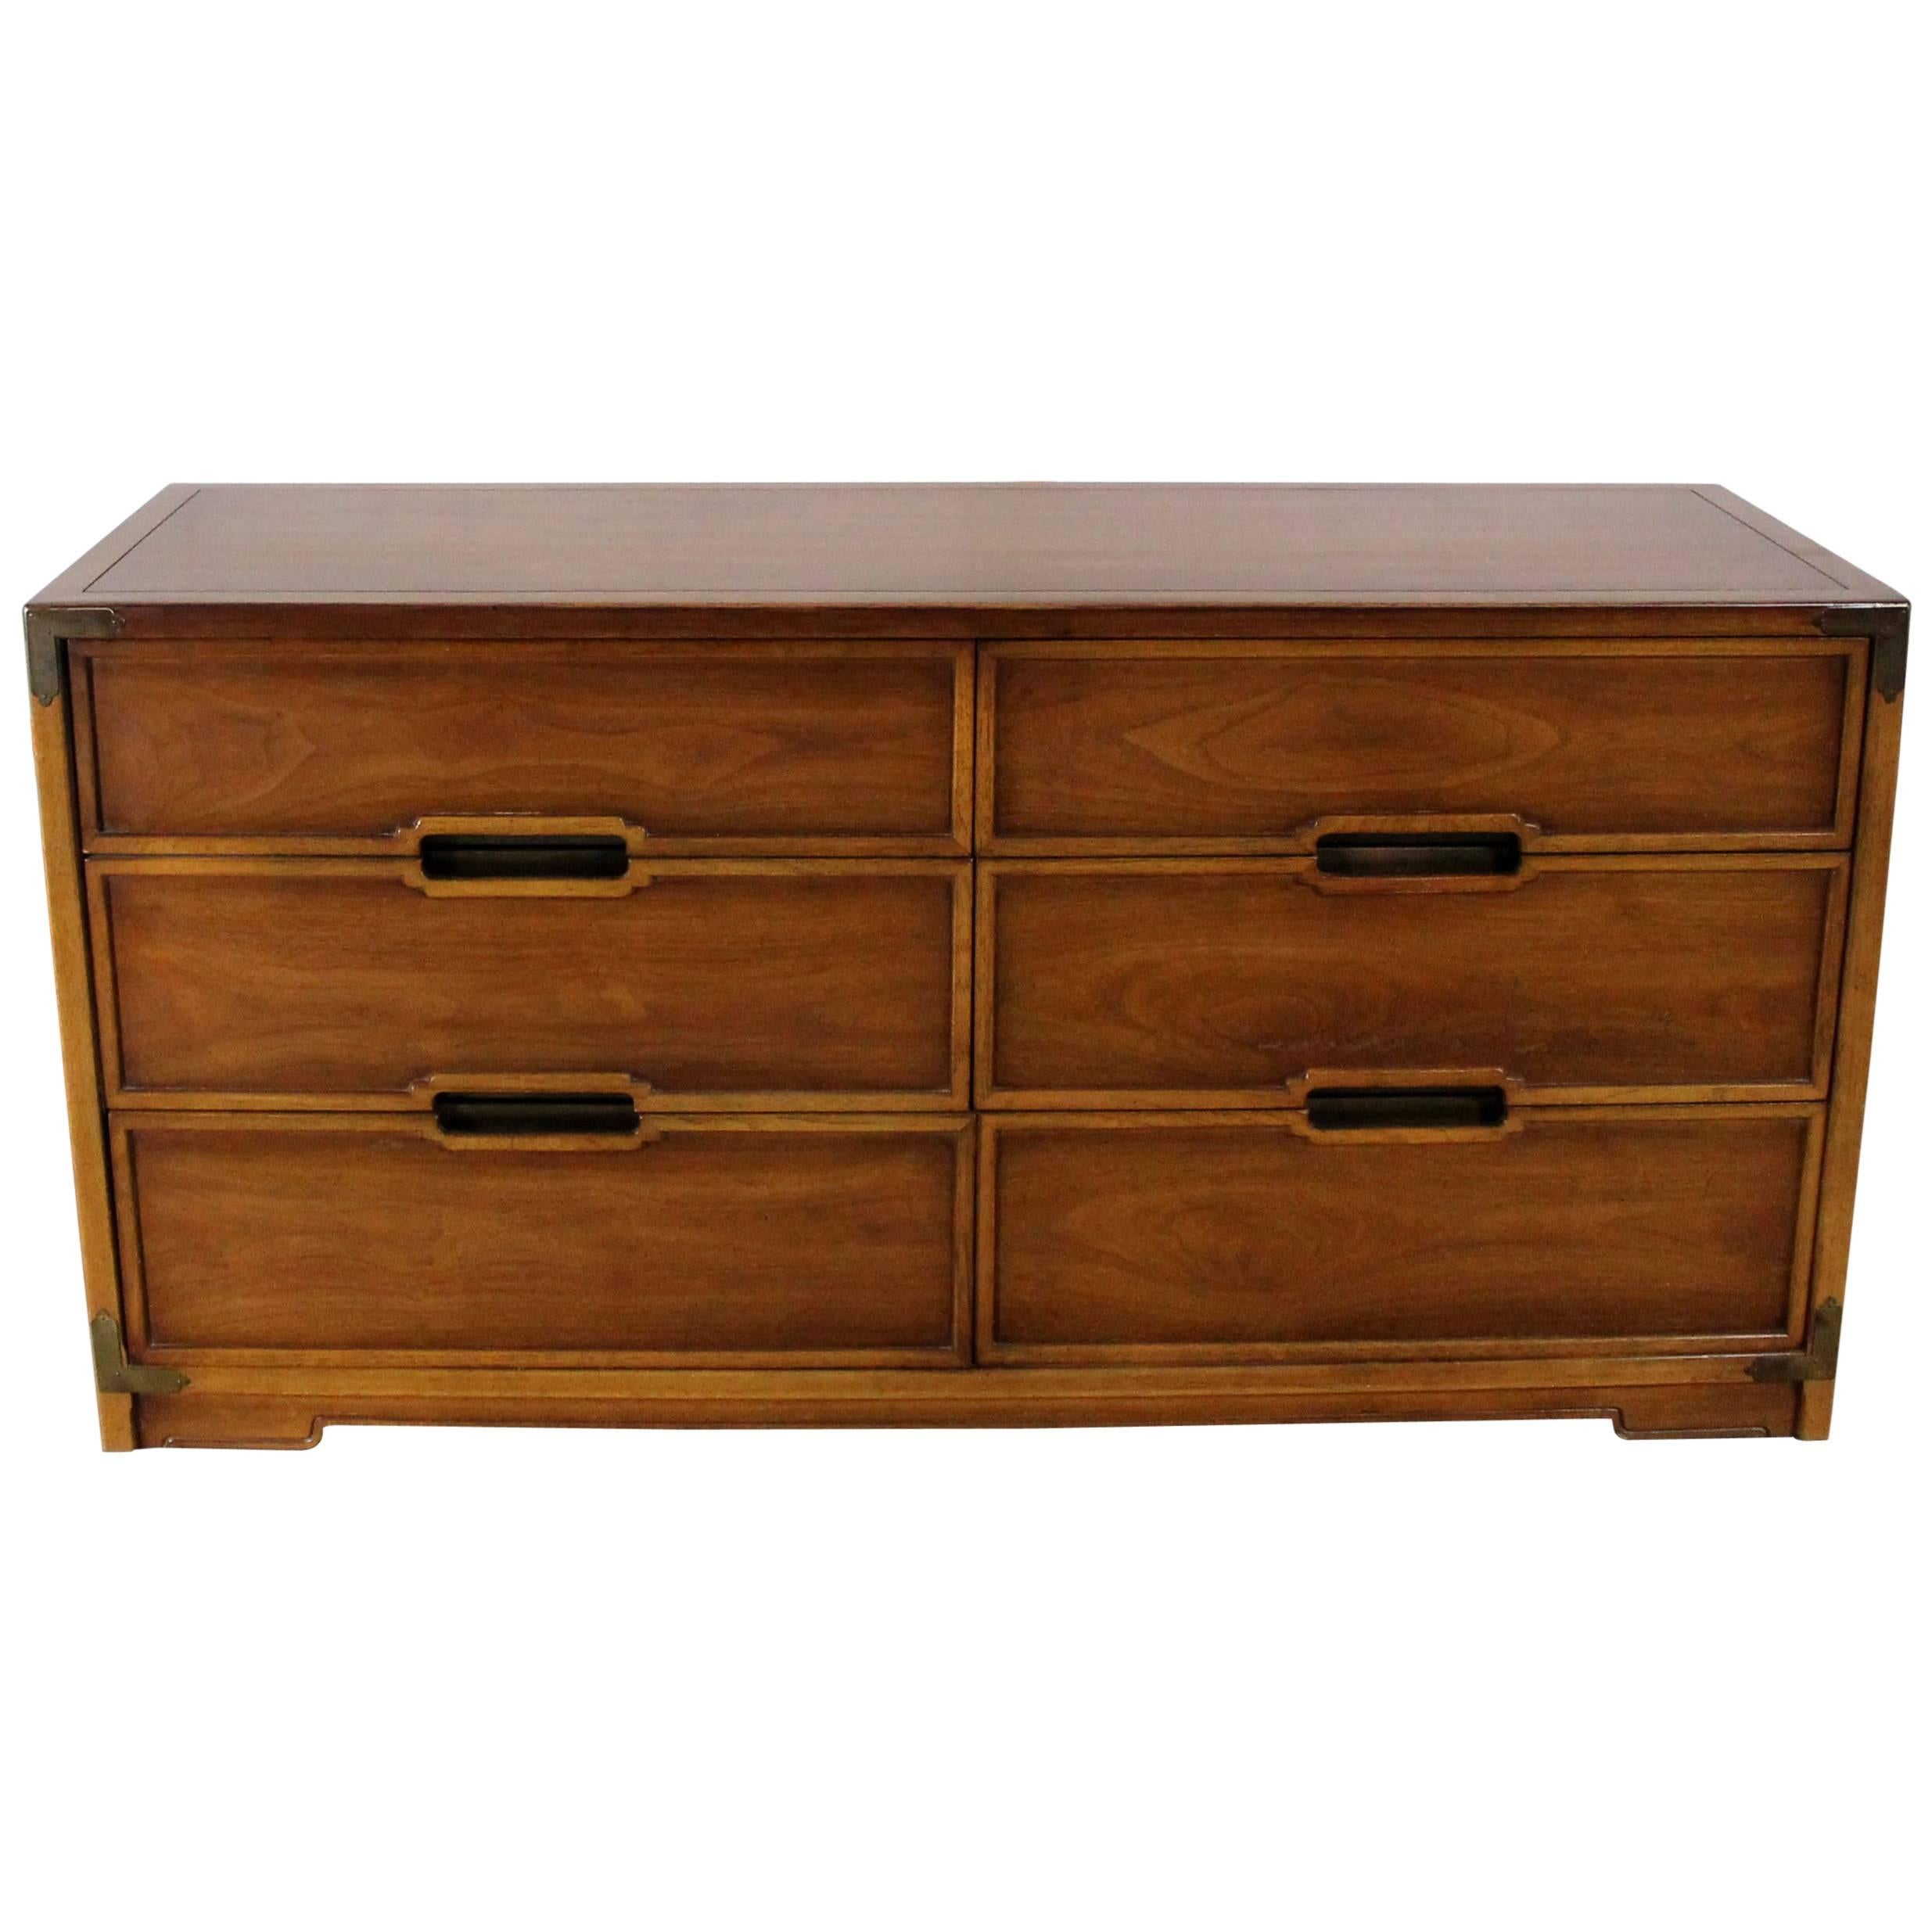 Compass by Drexel Six-Drawer Campaign Dresser, Vintage, Mid-Century